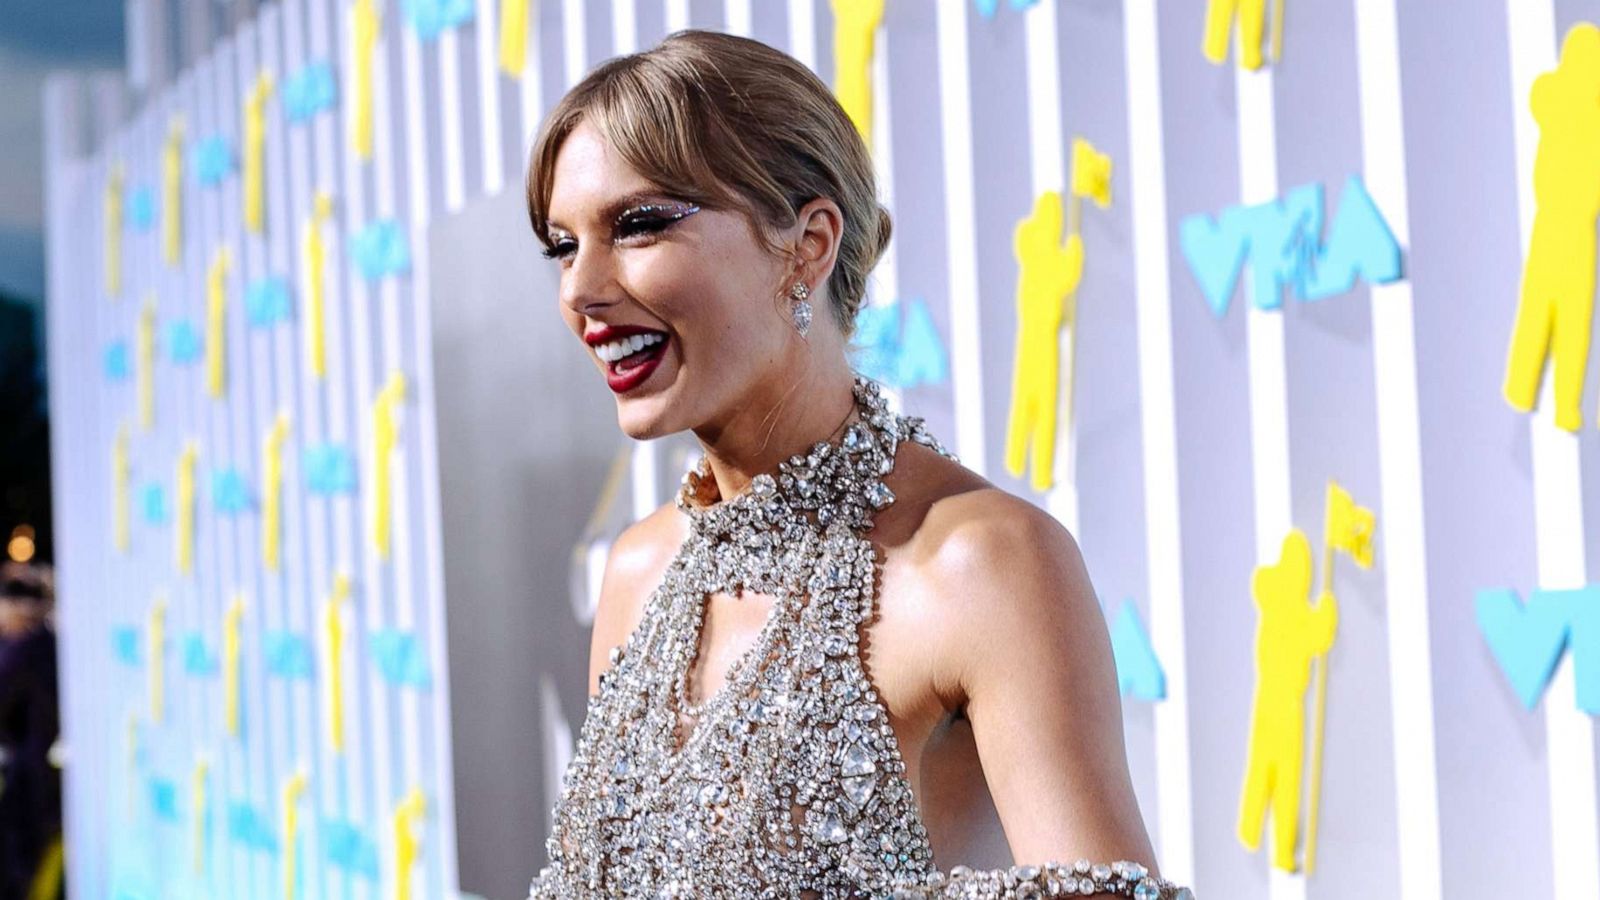 NowThis - Taylor Swift released her latest riddle for her fans